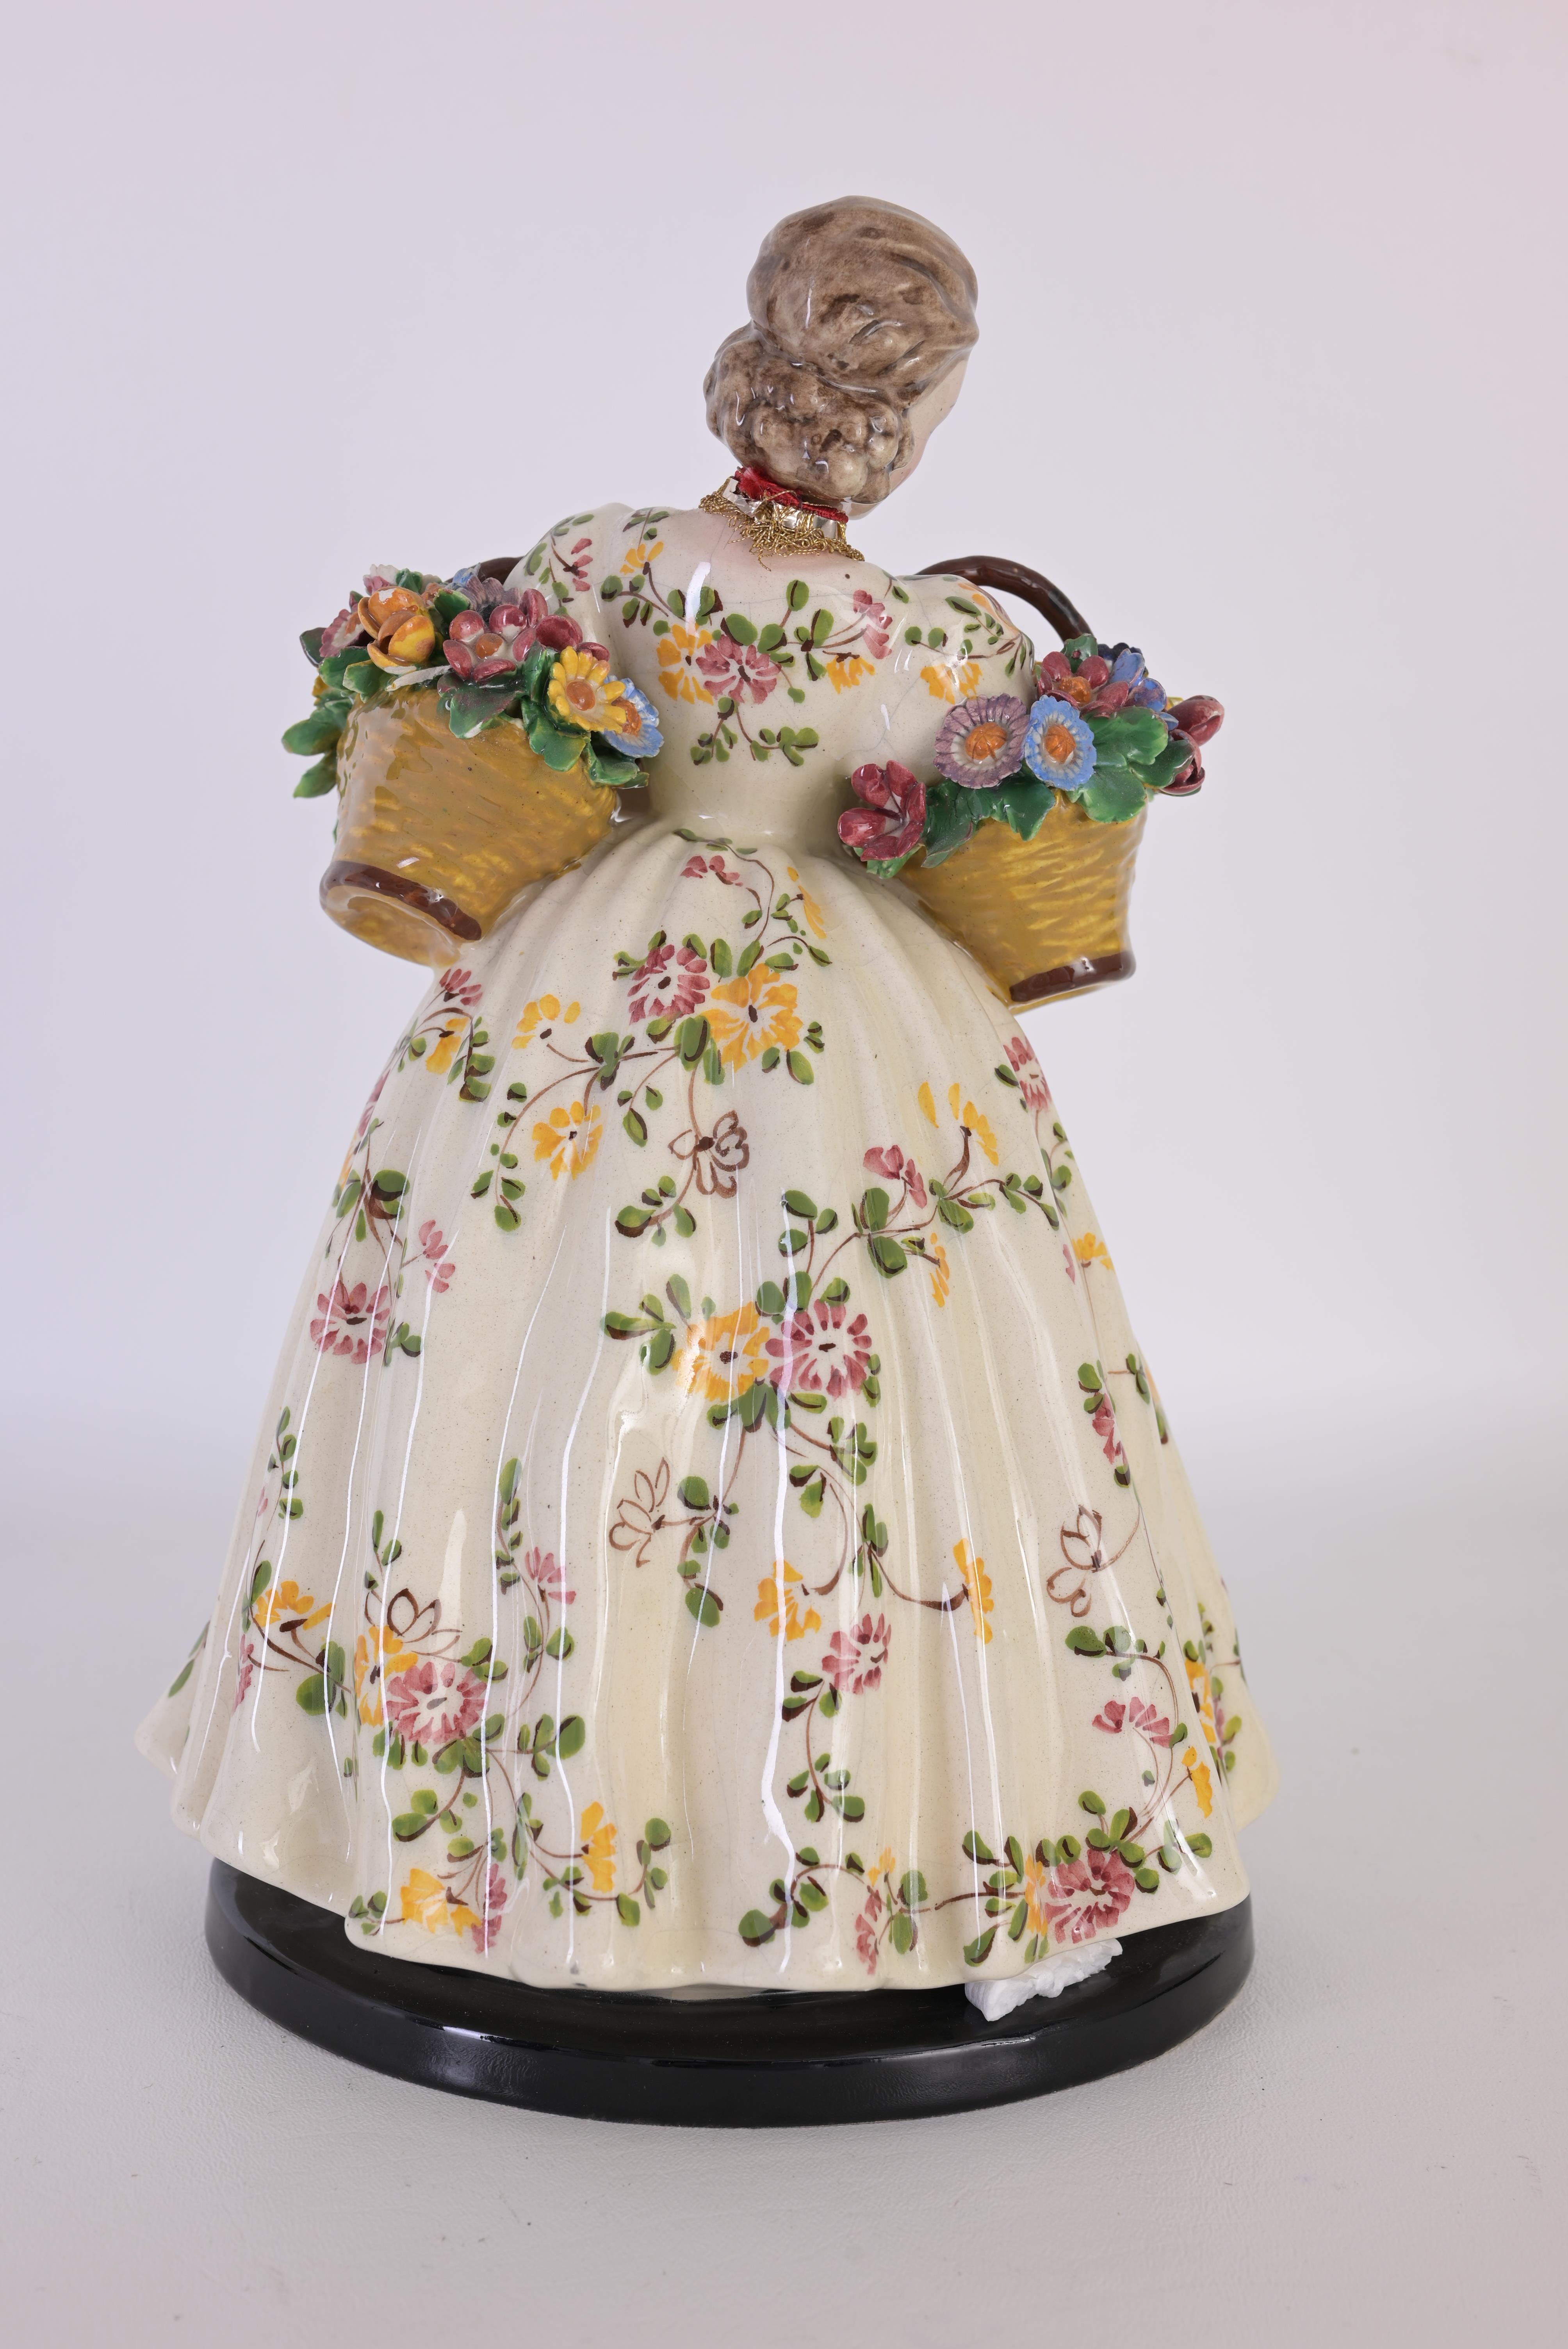 Dresden Style Porcelain Figurine - Image 5 of 9